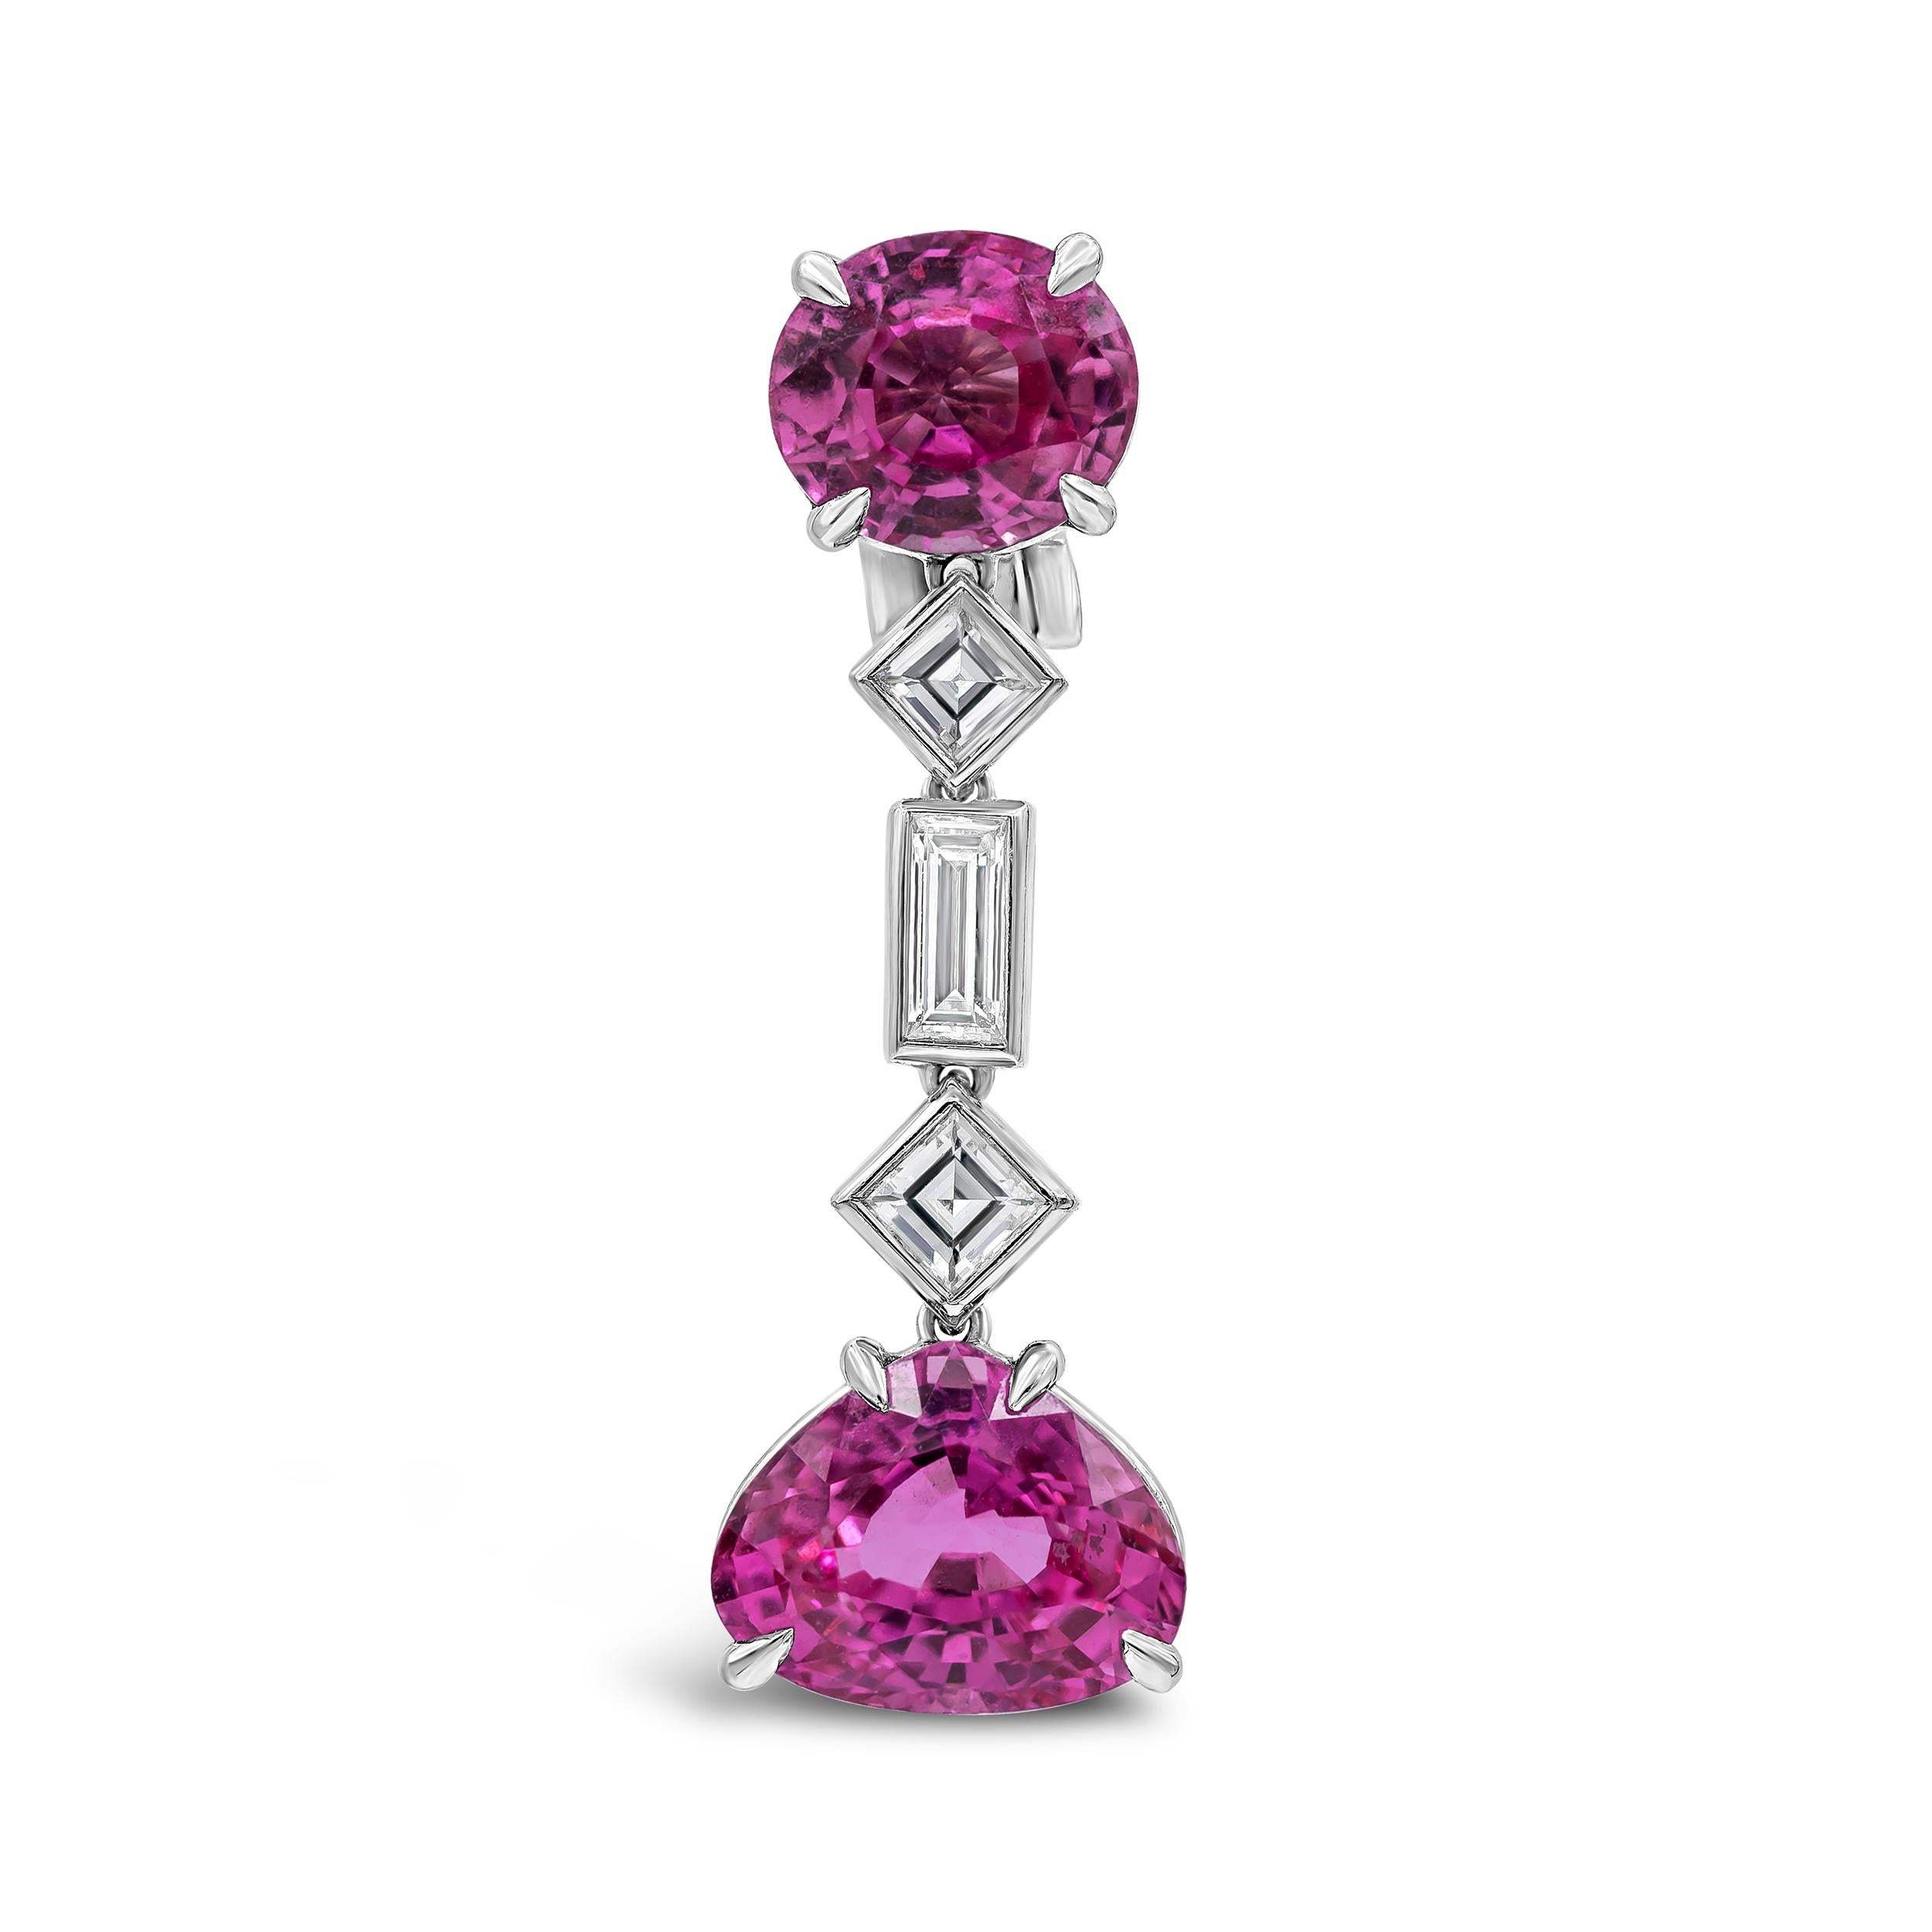 Features four brilliant pink sapphires weighing 9.80 carats total, spaced by three step-cut diamonds weighing 0.90 carats total. Diamonds are approximately F-H color, VVS-VS clarity. Stamped Bulgari. Omega Clip with no post. Made in platinum.